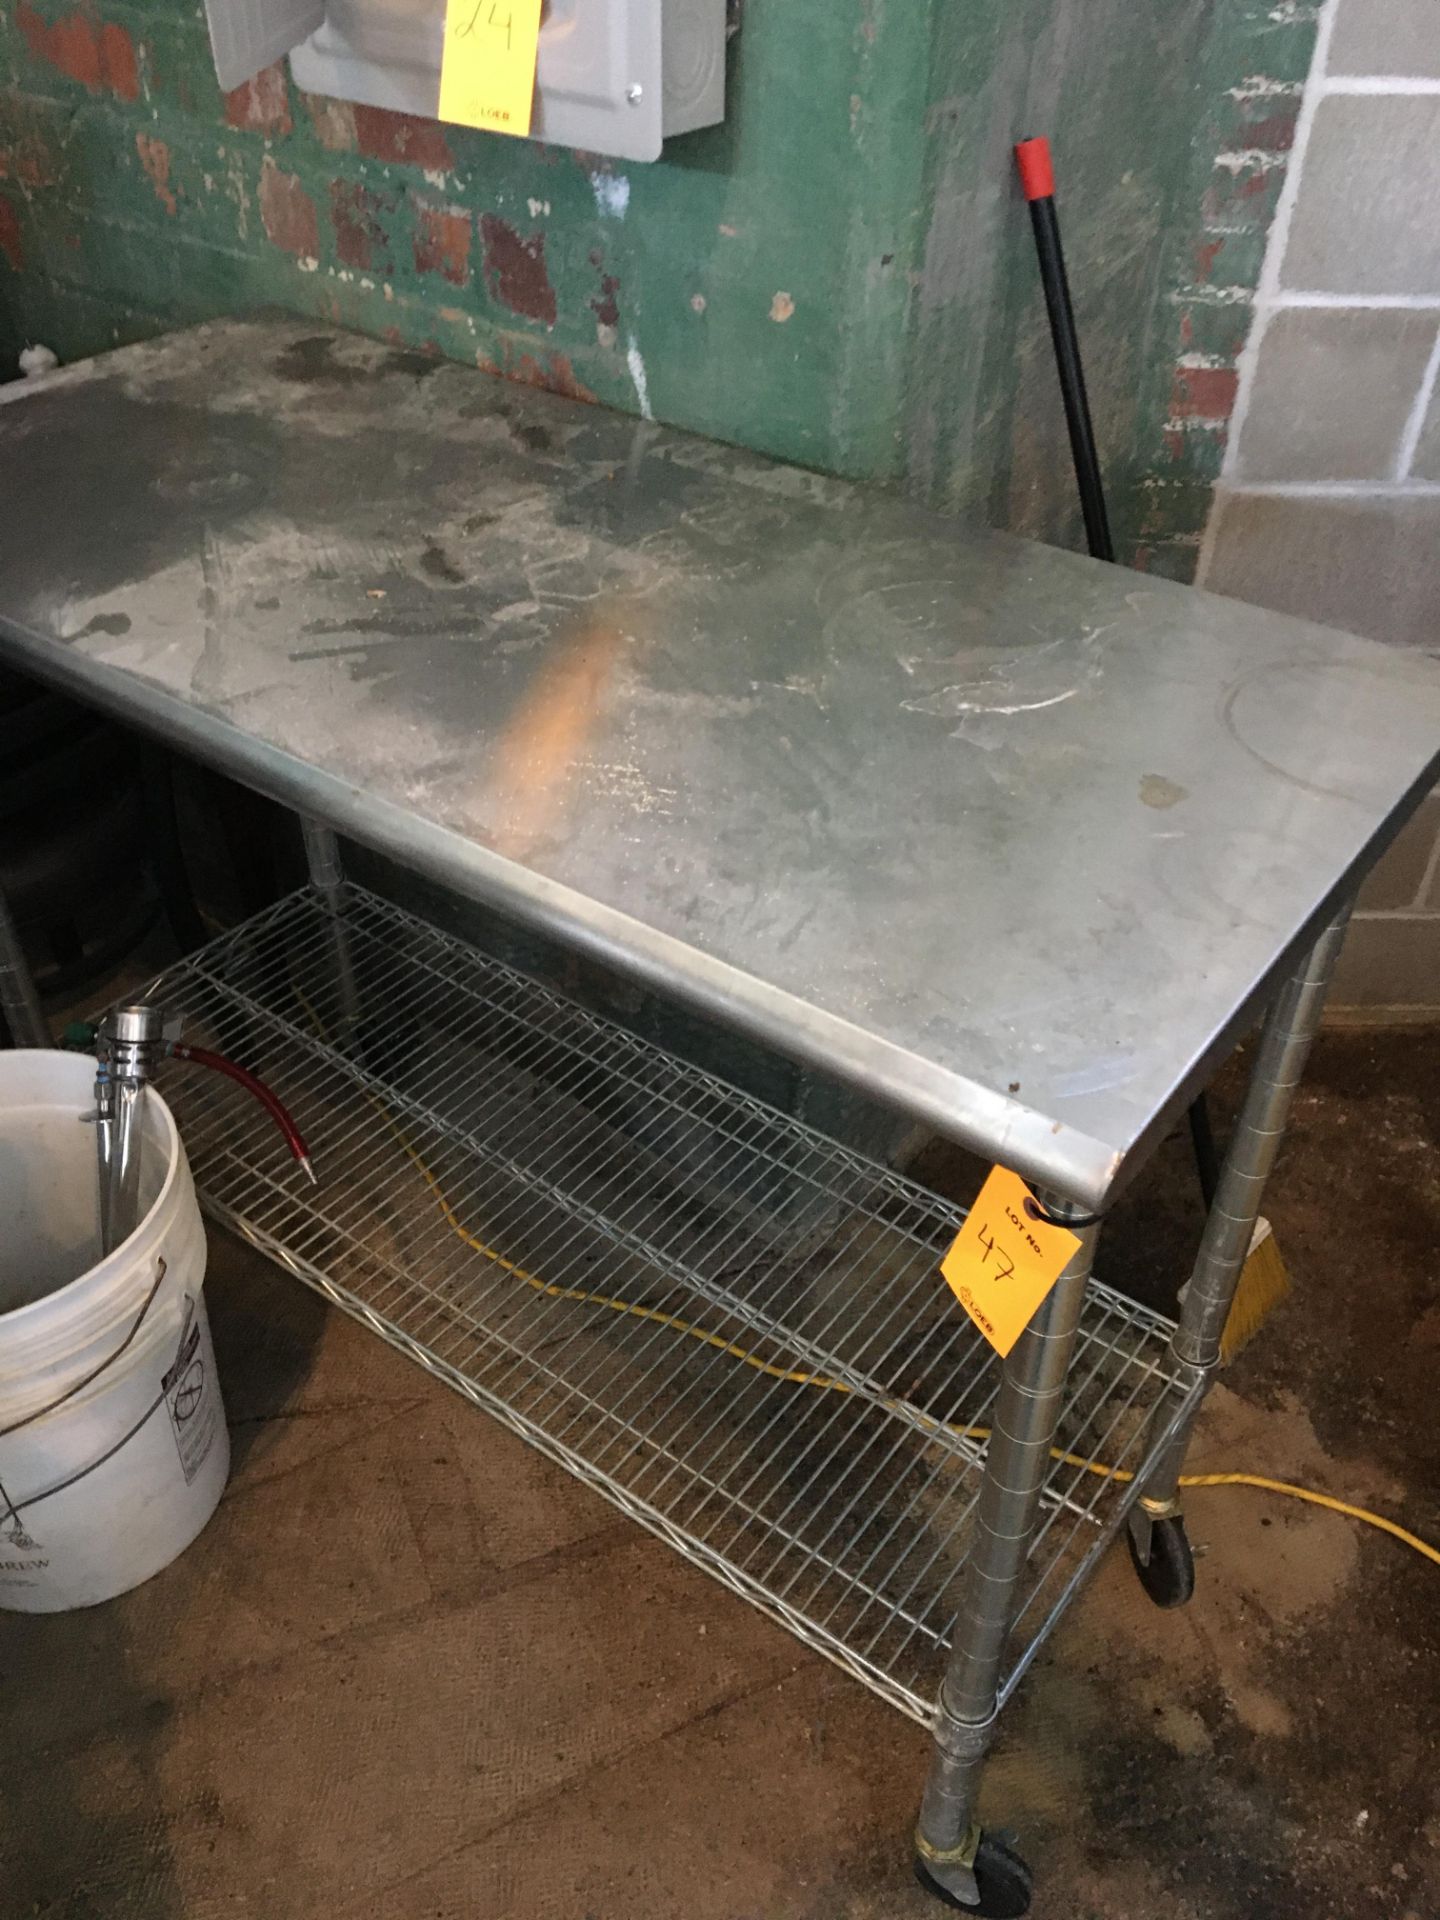 Unknown Table With Wheels, Stainless Steel; table on wheels with a rack on the bottom for storage